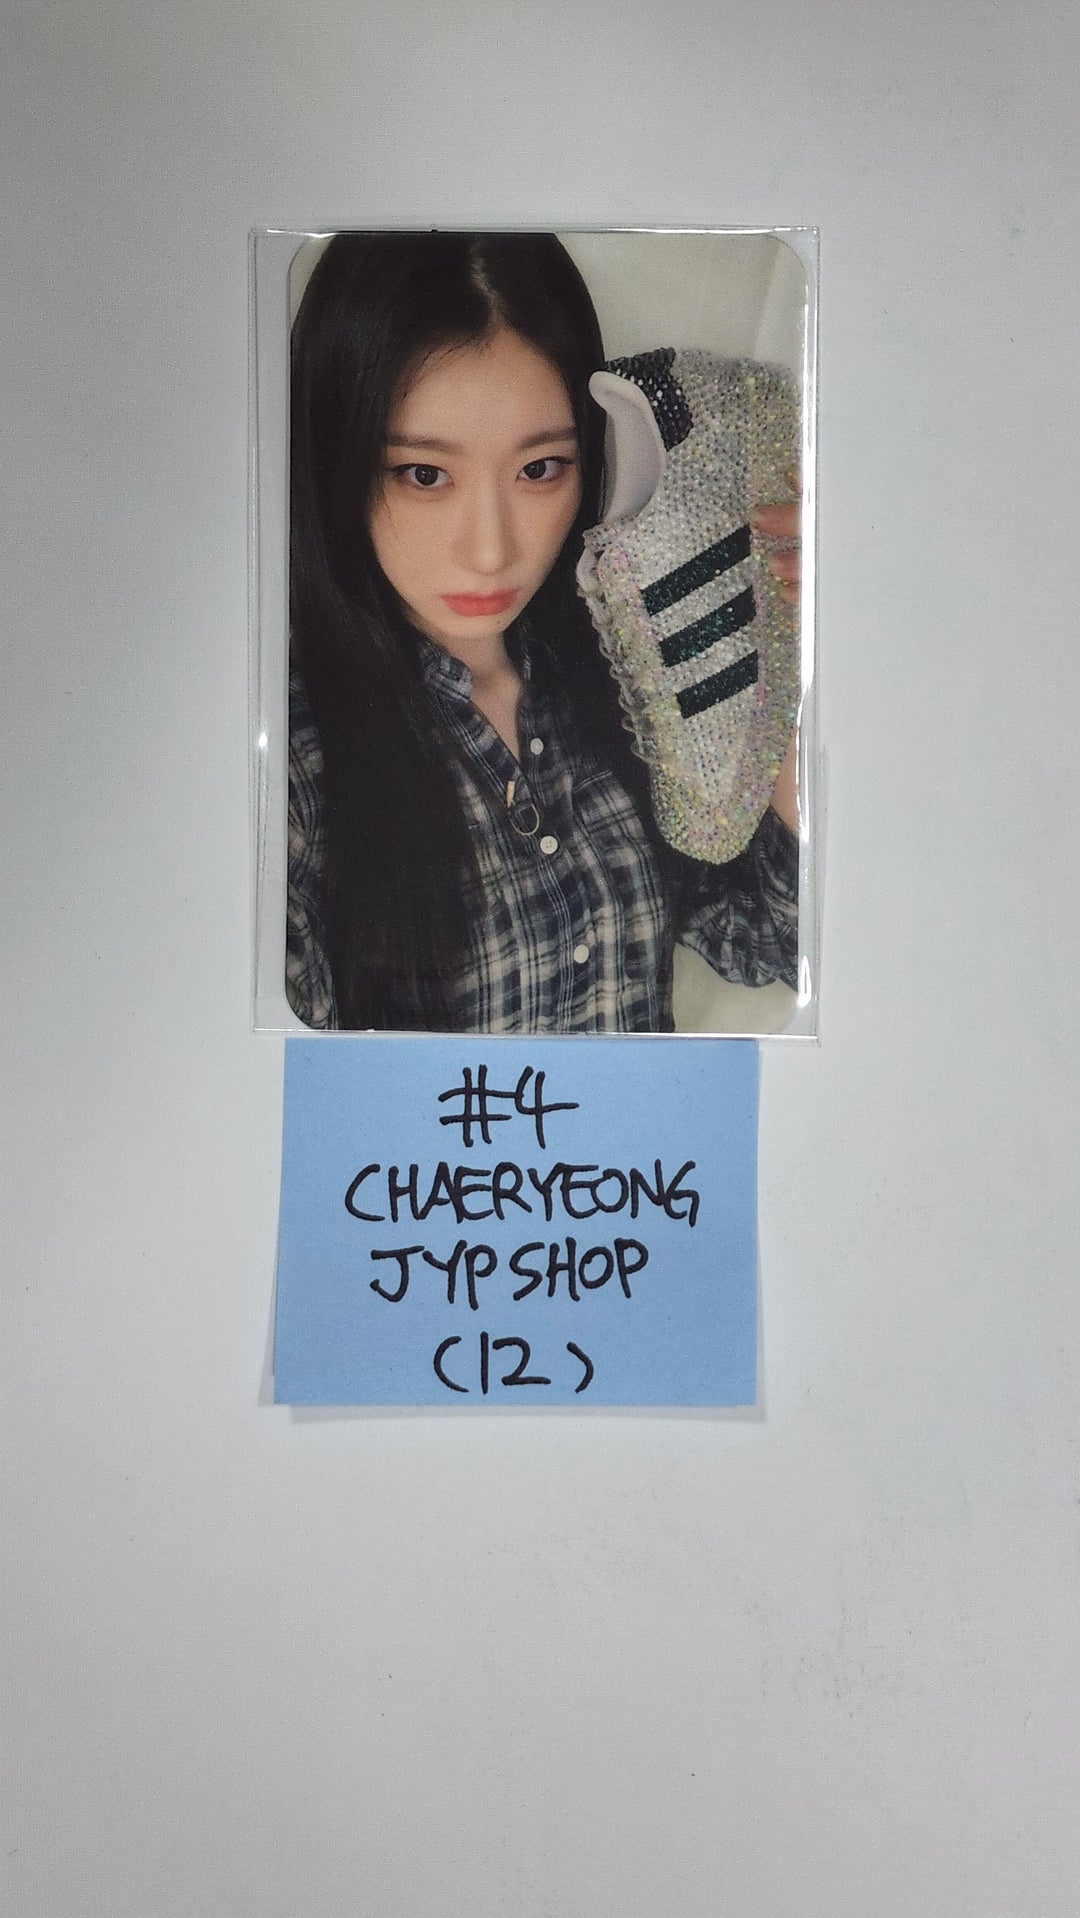 ITZY 'CHECKMATE' - JYP Shop Pre-Order Benefit Photocard